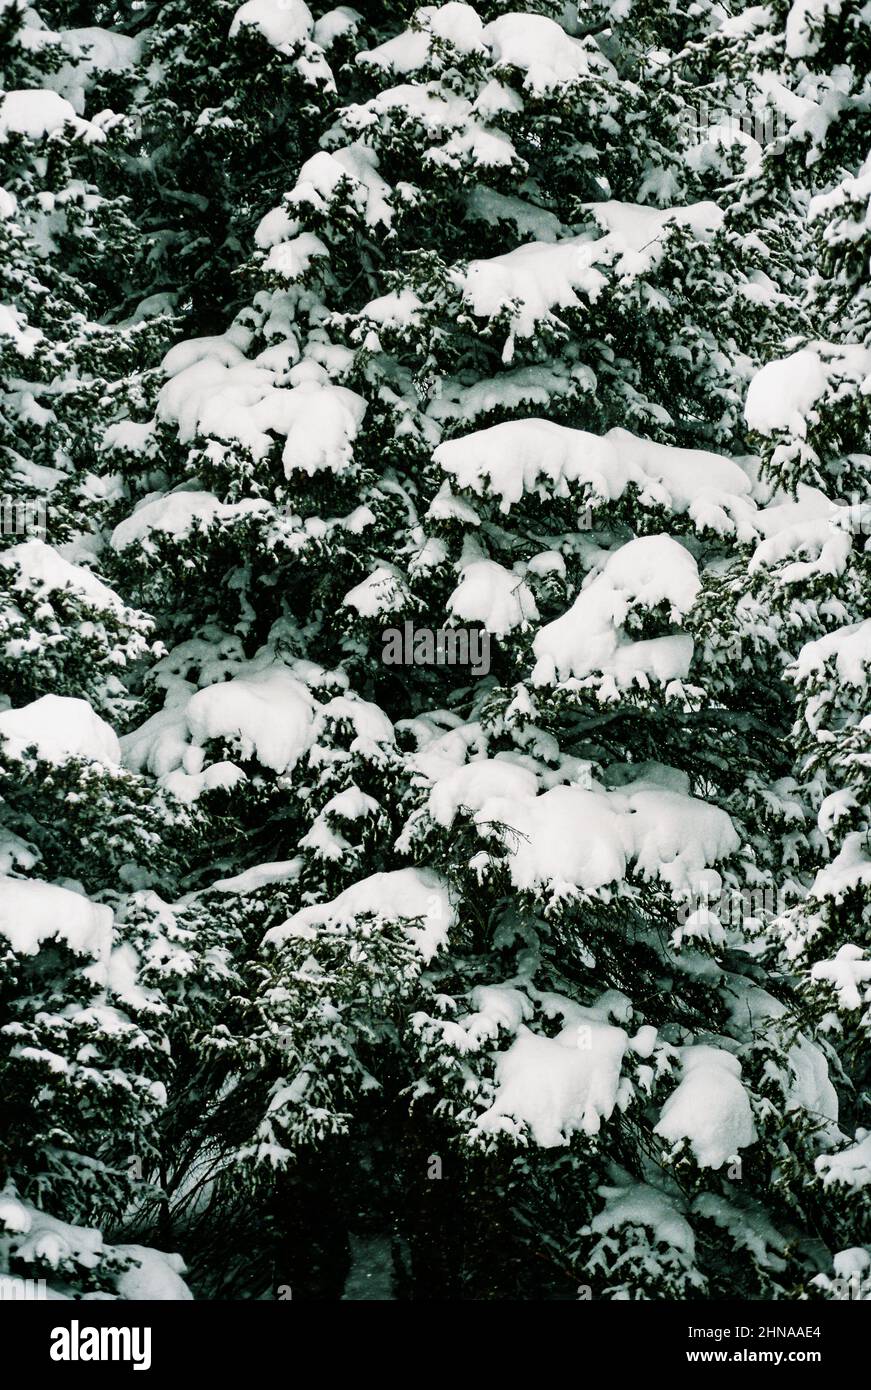 Giant Ponderosa Pine Tree Covered in Heavy Snow in Colorado Forest Stock Photo